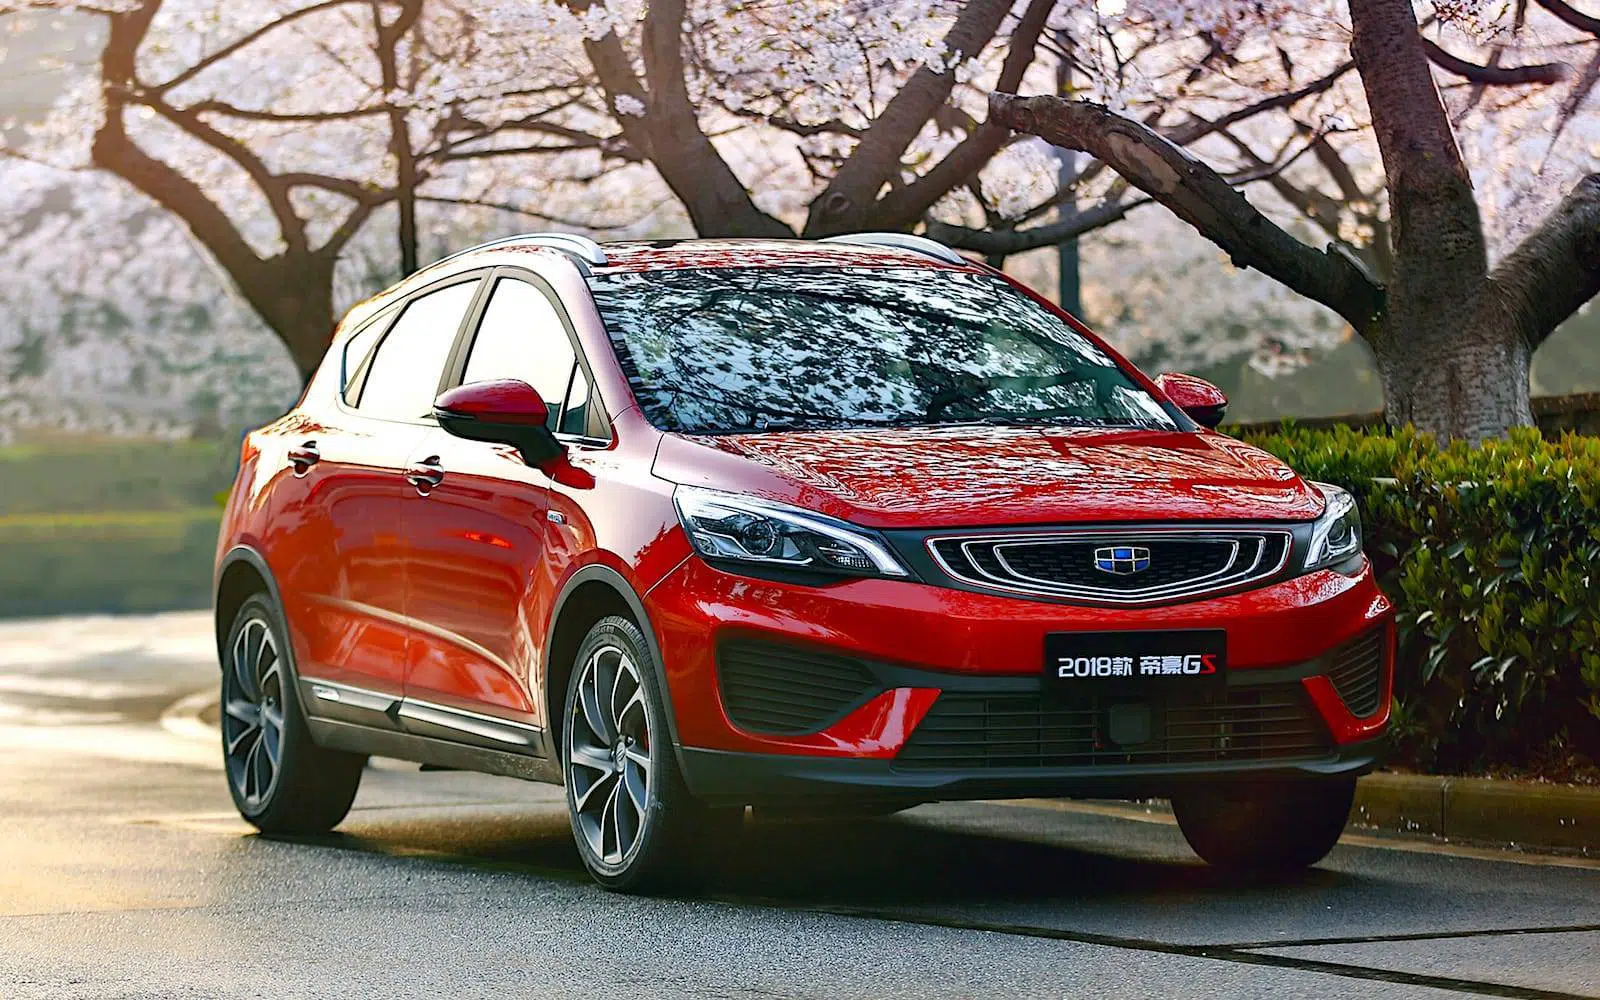 Geely Emgrand GS 2018